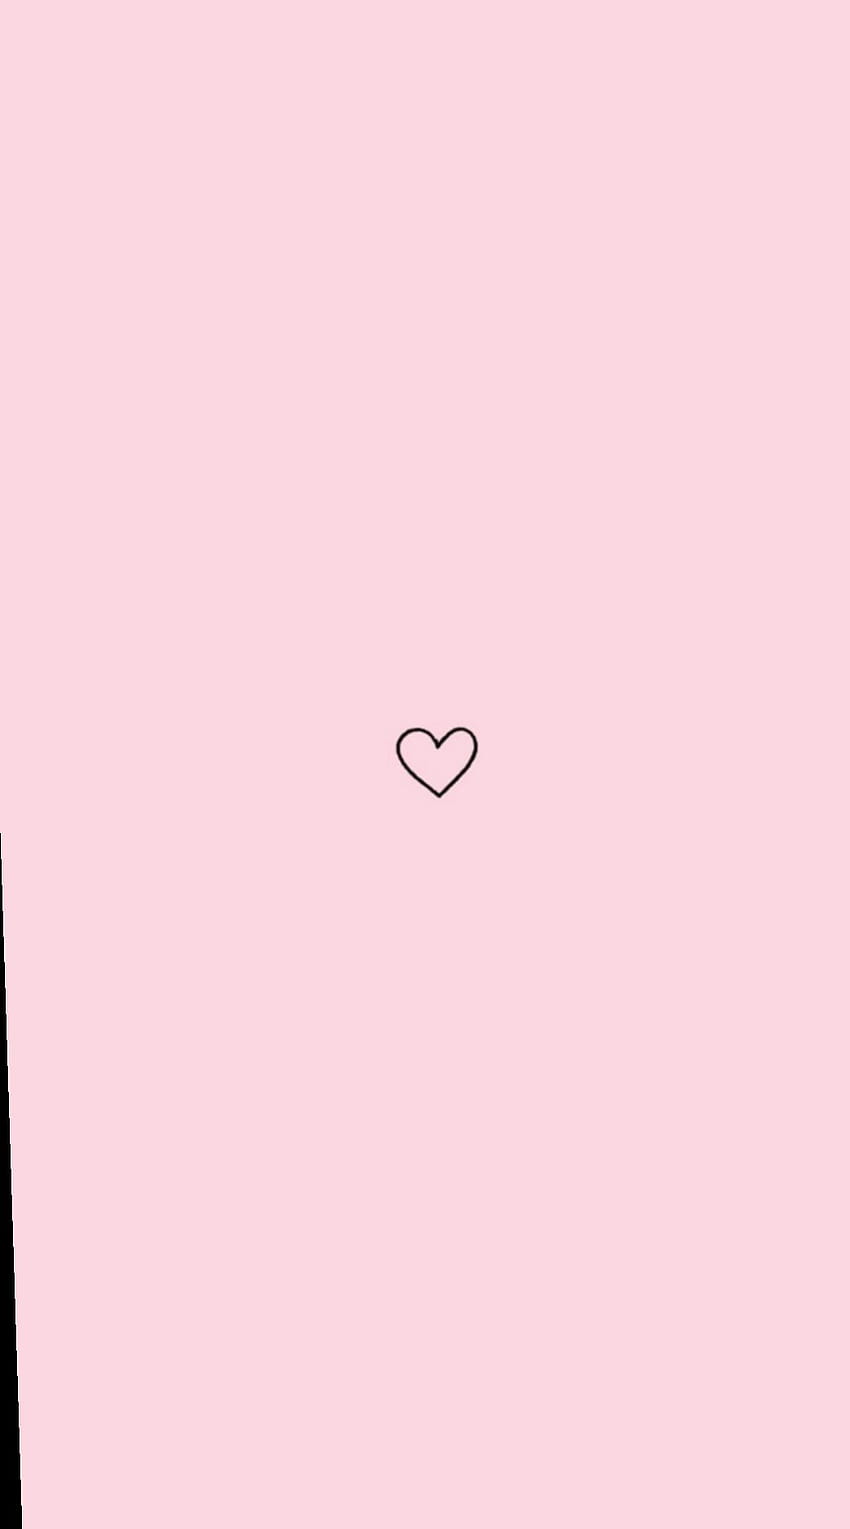 Story Highlights Hintergrund Pink in 2019, vsco pink HD phone wallpaper